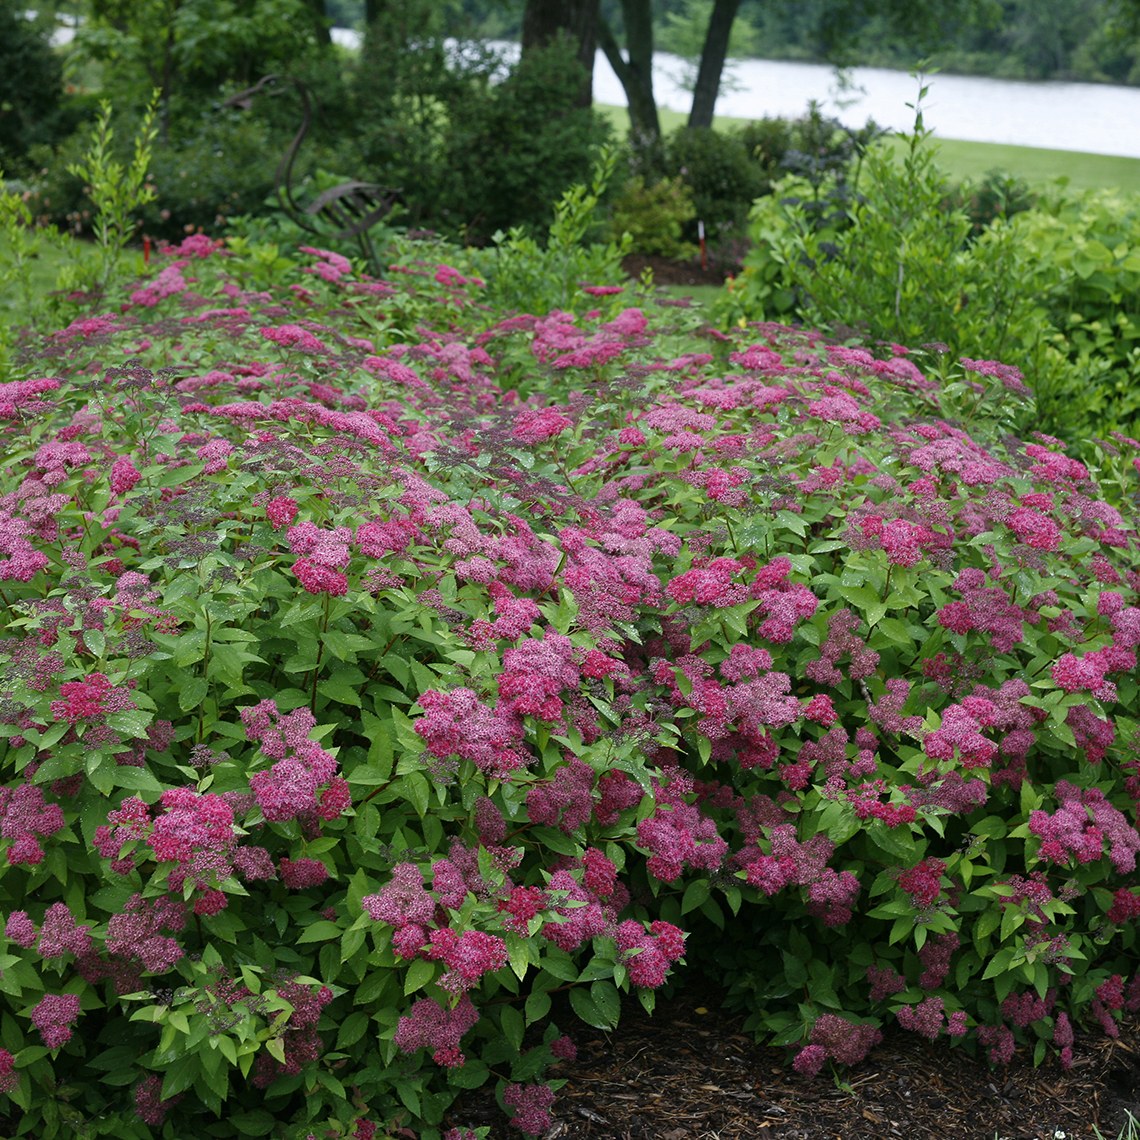 Mass planting of Double Play Red Spiraea in landscape